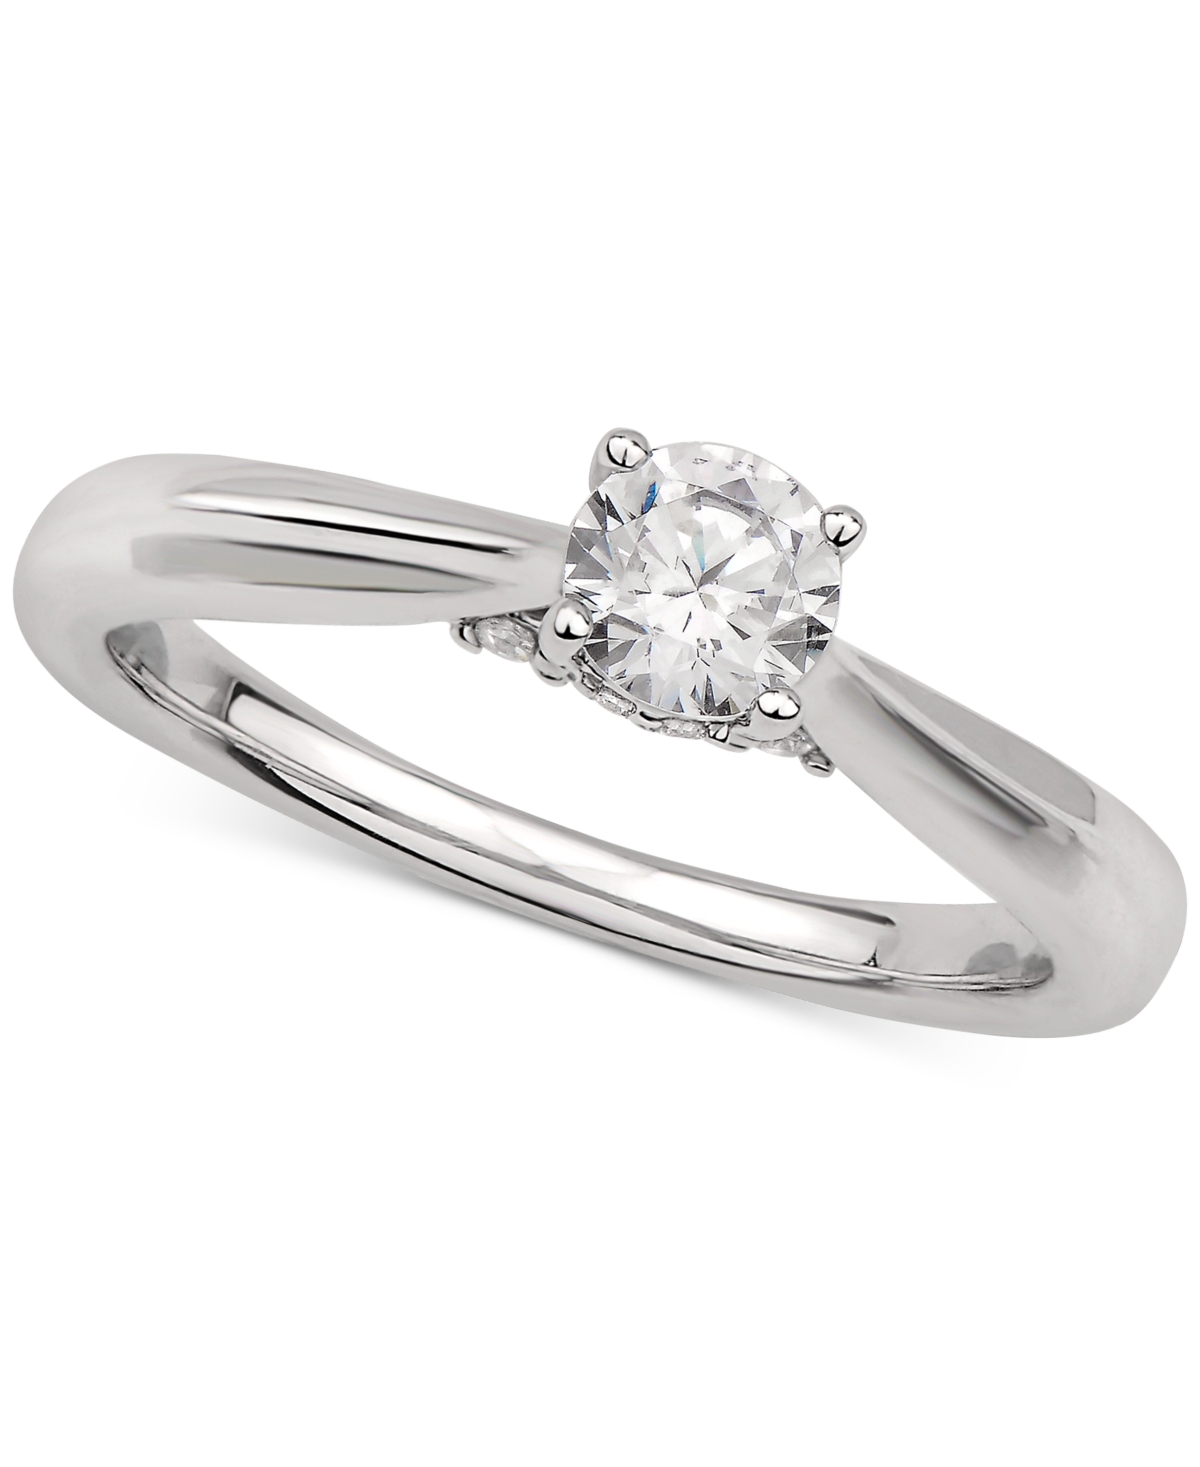 Gia Certified Diamond Solitaire Engagement Ring (1/2 ct. t.w.) in 14k White Gold - White Gold